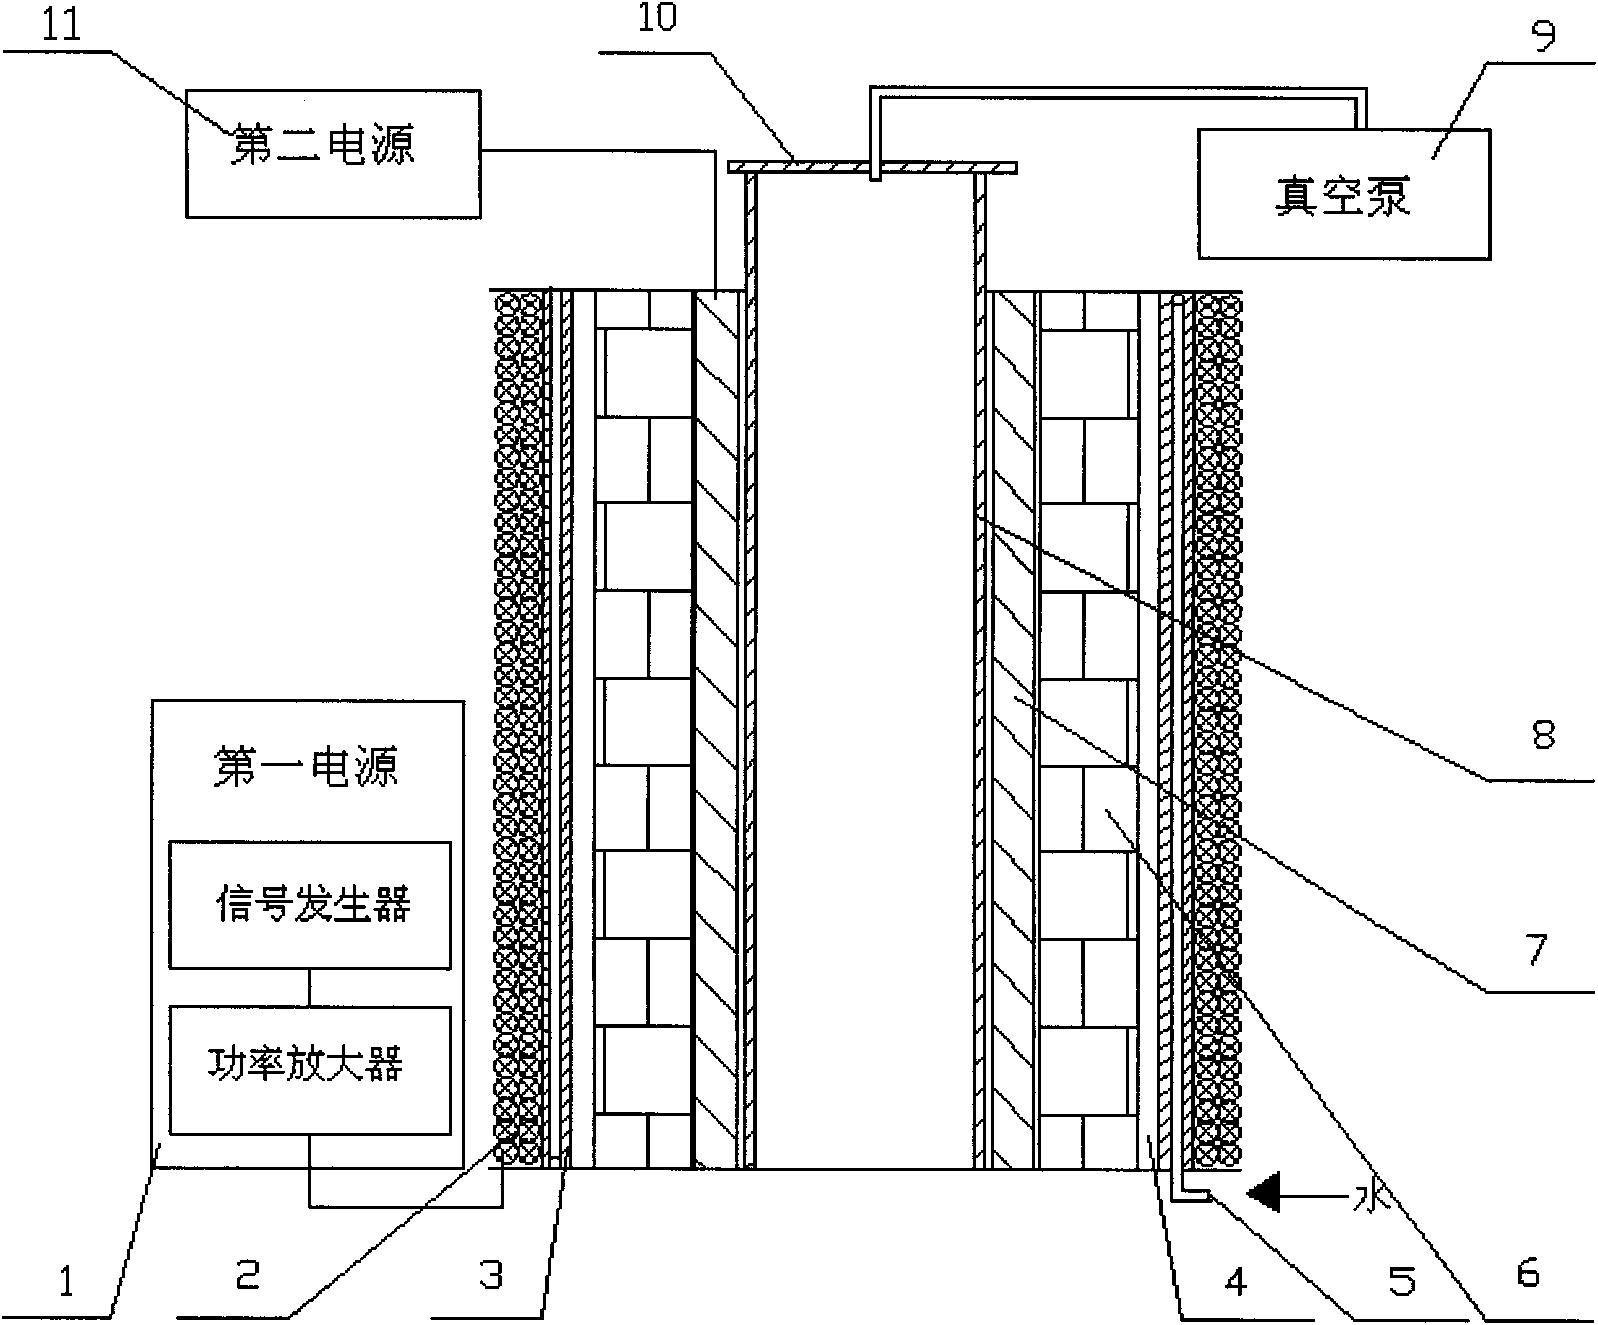 High-temperature atmosphere furnace with electromagnetic field